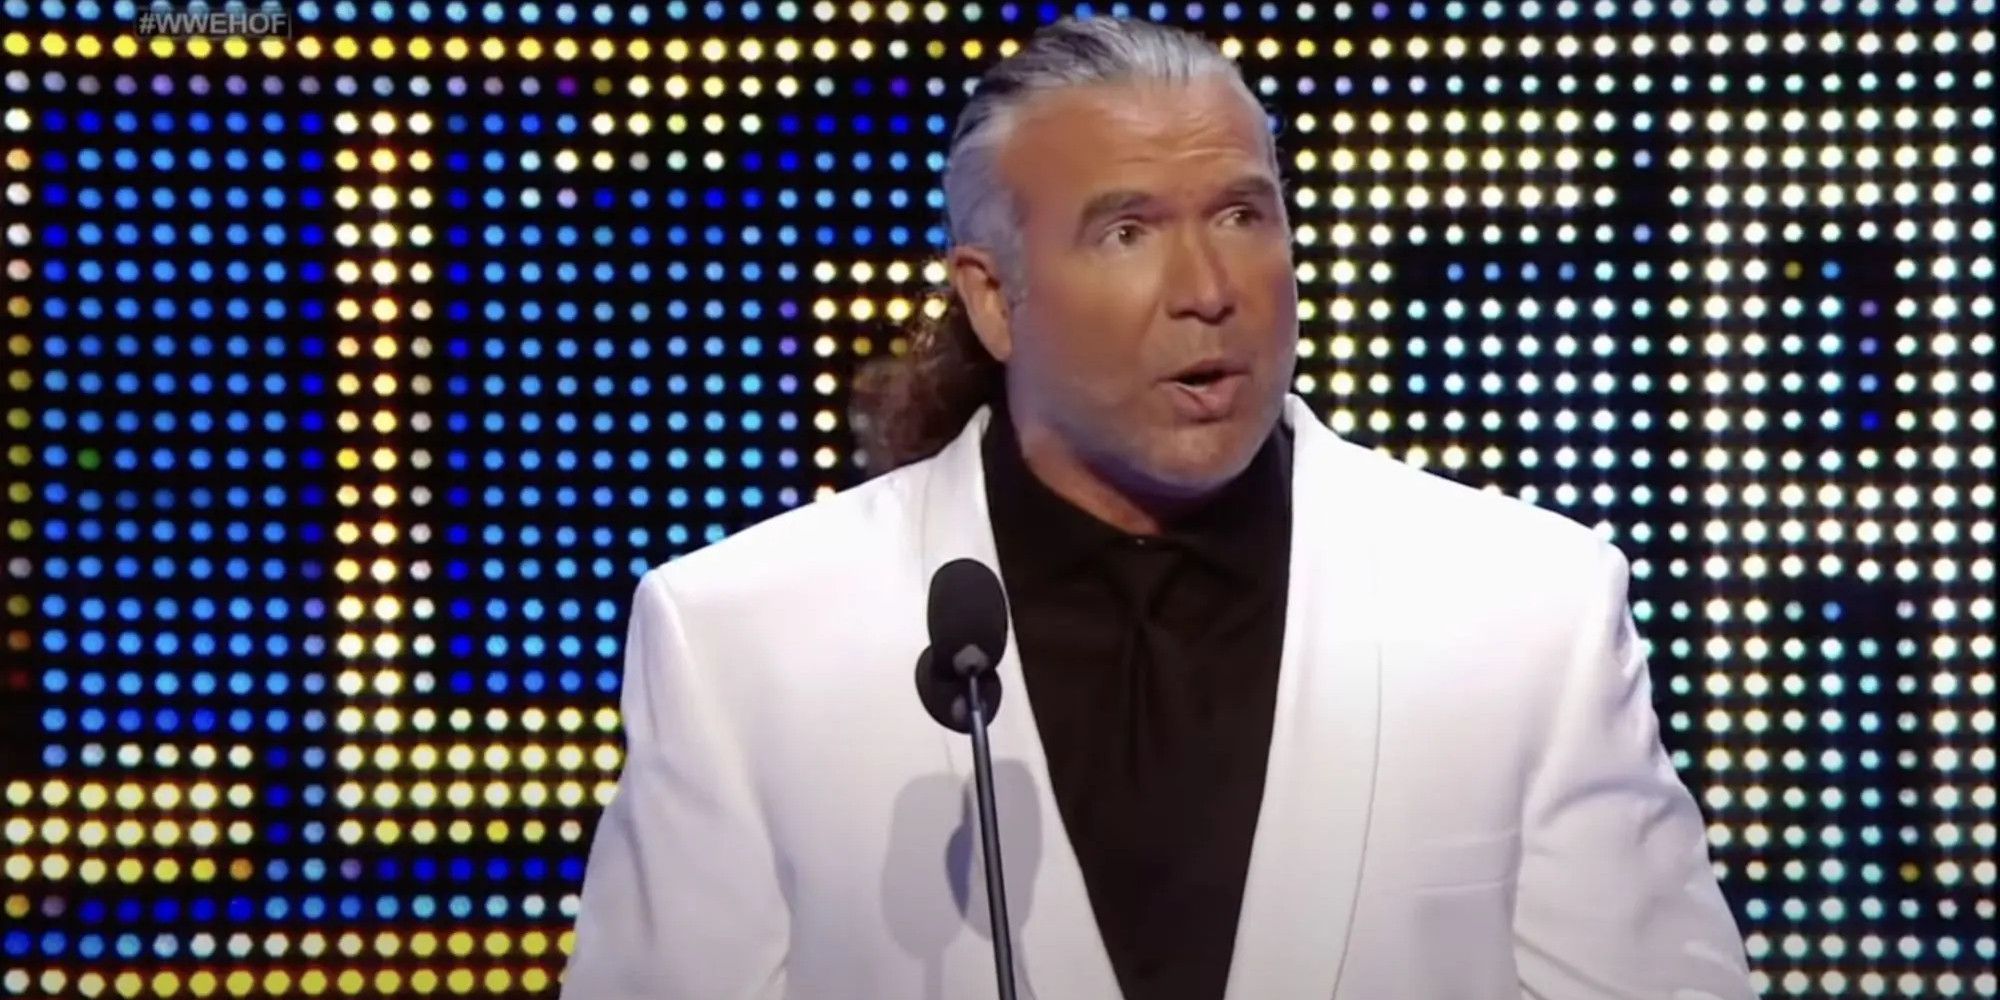 Scott Hall Joining the WWE Hall of Fame in 2014